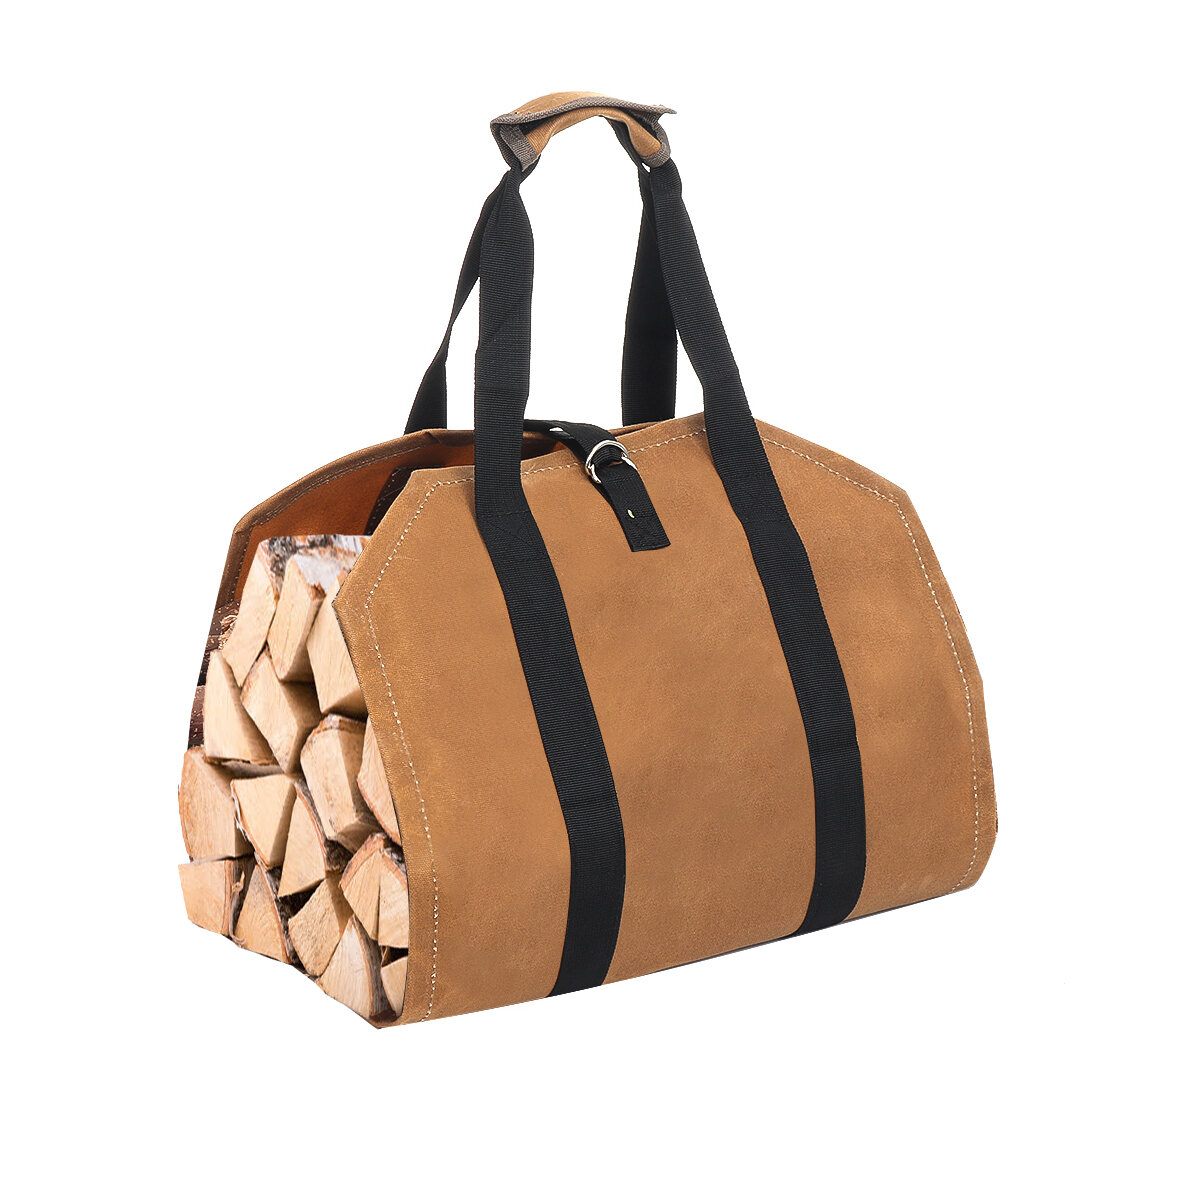 Houtdrager houder canvas tas hout tas hout opslag organizer waterdichte draagbare outdoor camping.